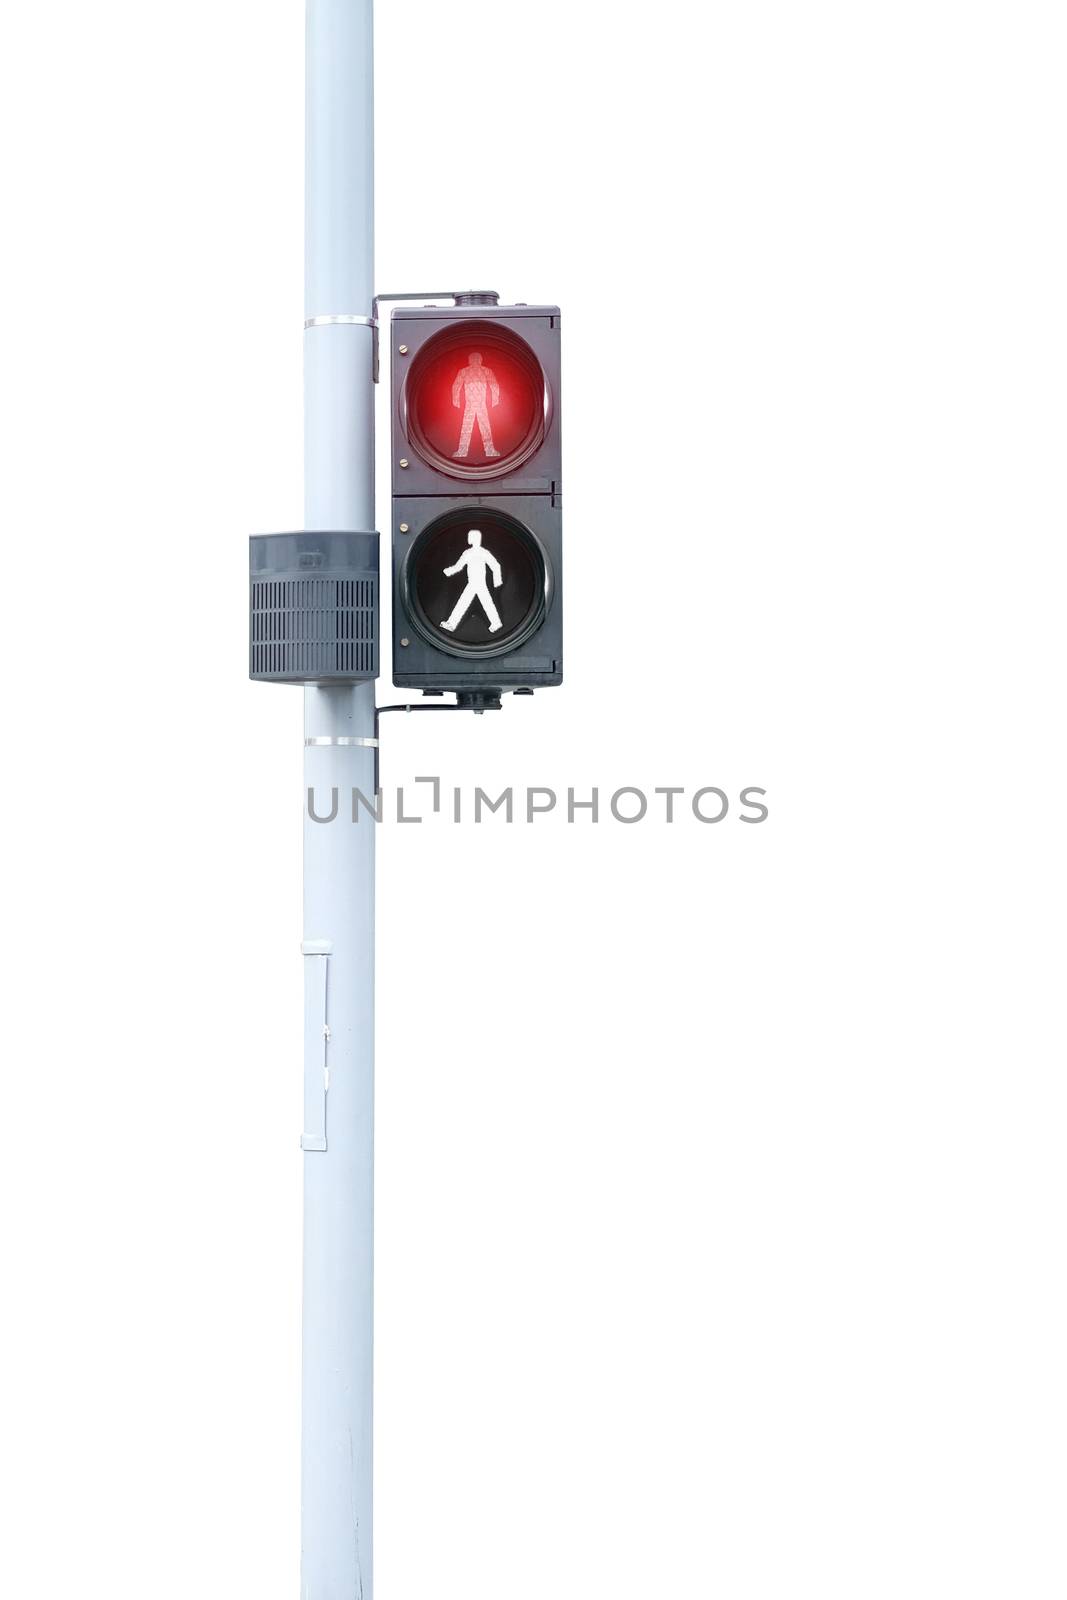 Traffic lights, Red signal, Stop on white background with clippi by Surasak